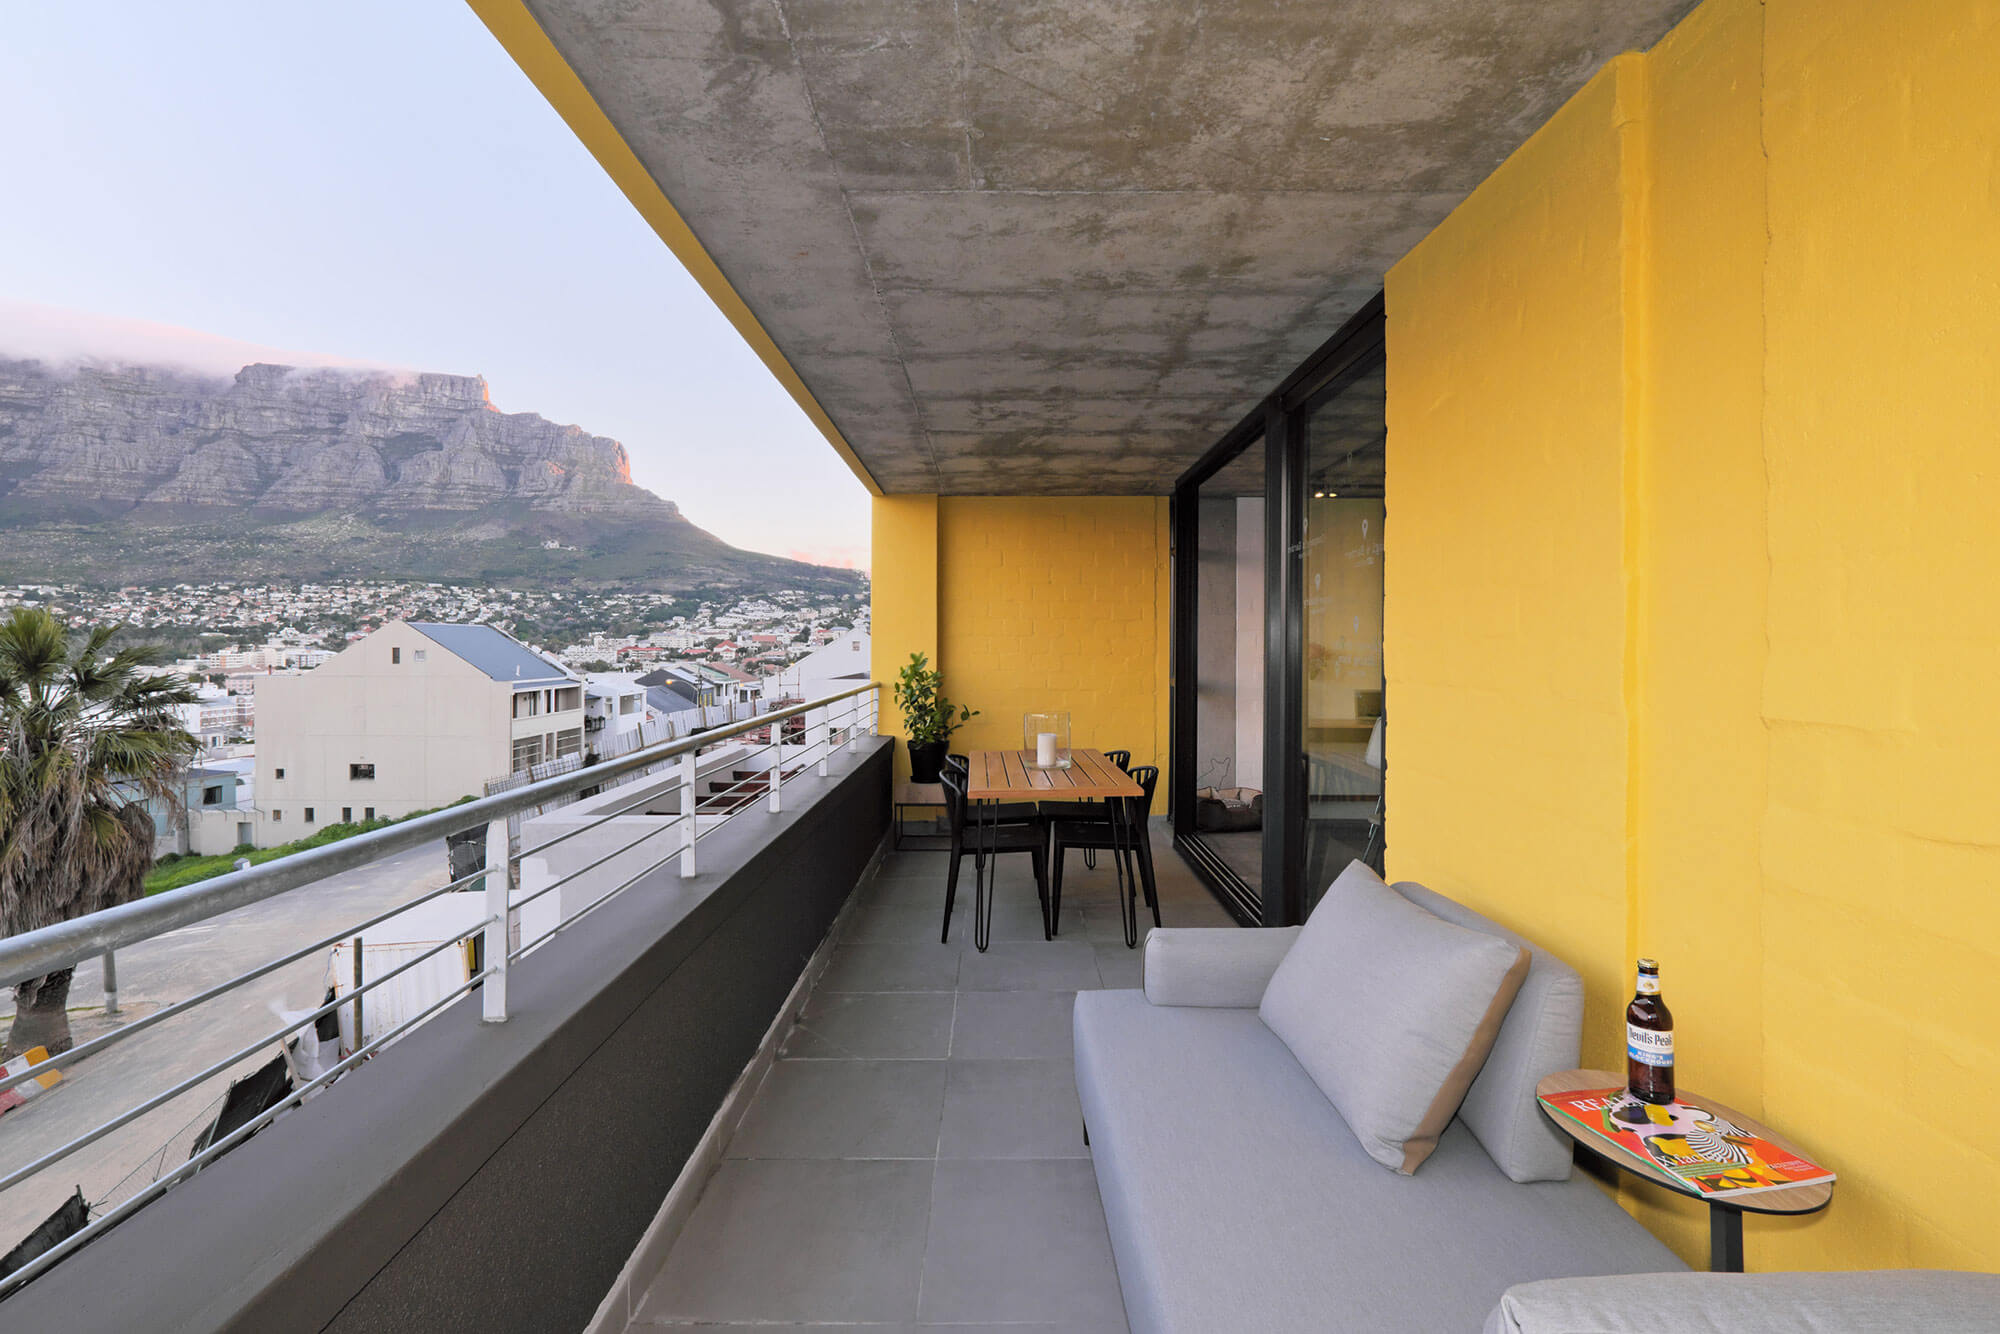 Located as it is within Cape Town’s historical Bo Kaap district, FORTY ON L also necessitated a far more considered approach to contextual integration — adding to the character and value of the neighbourhood rather than distorting it.